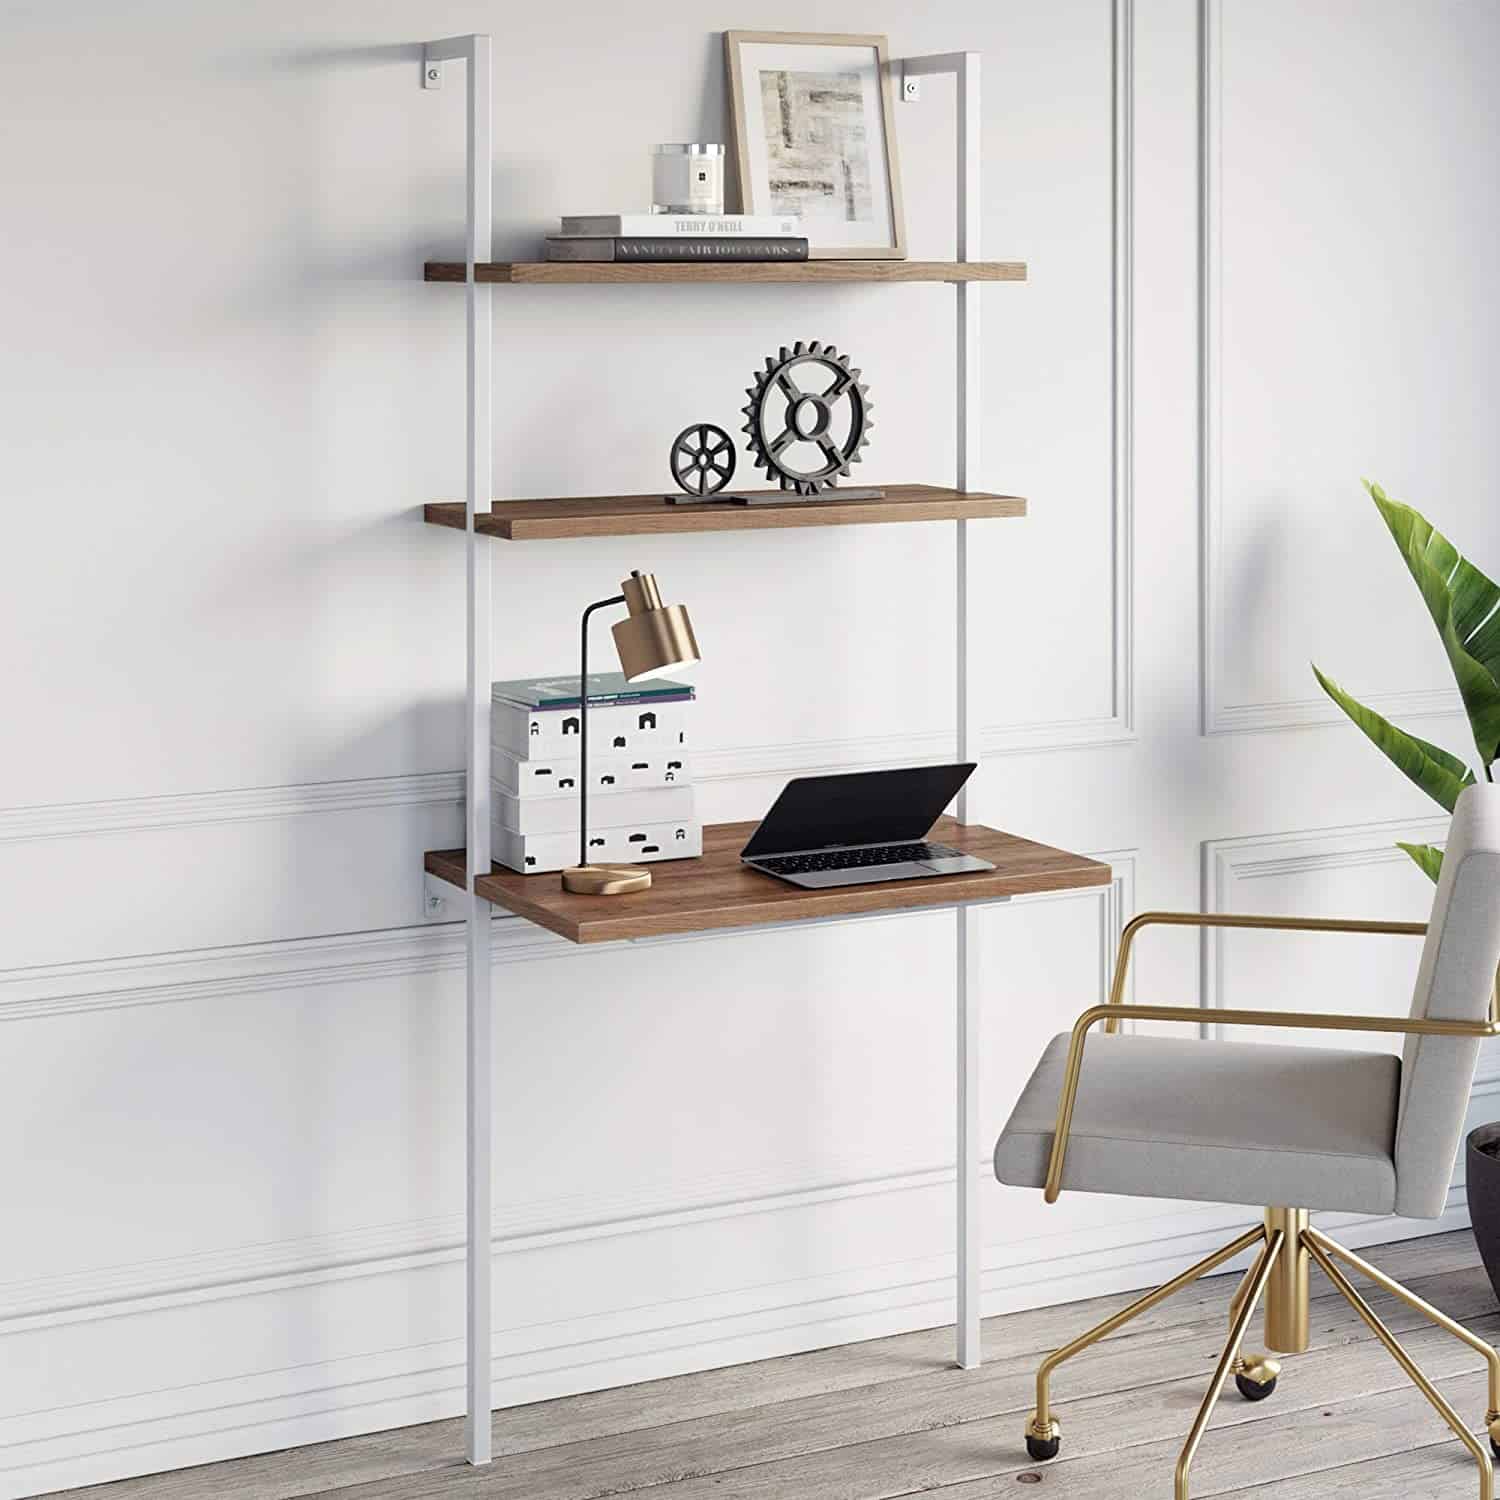 ladder style space saving desk mounted on the wall.